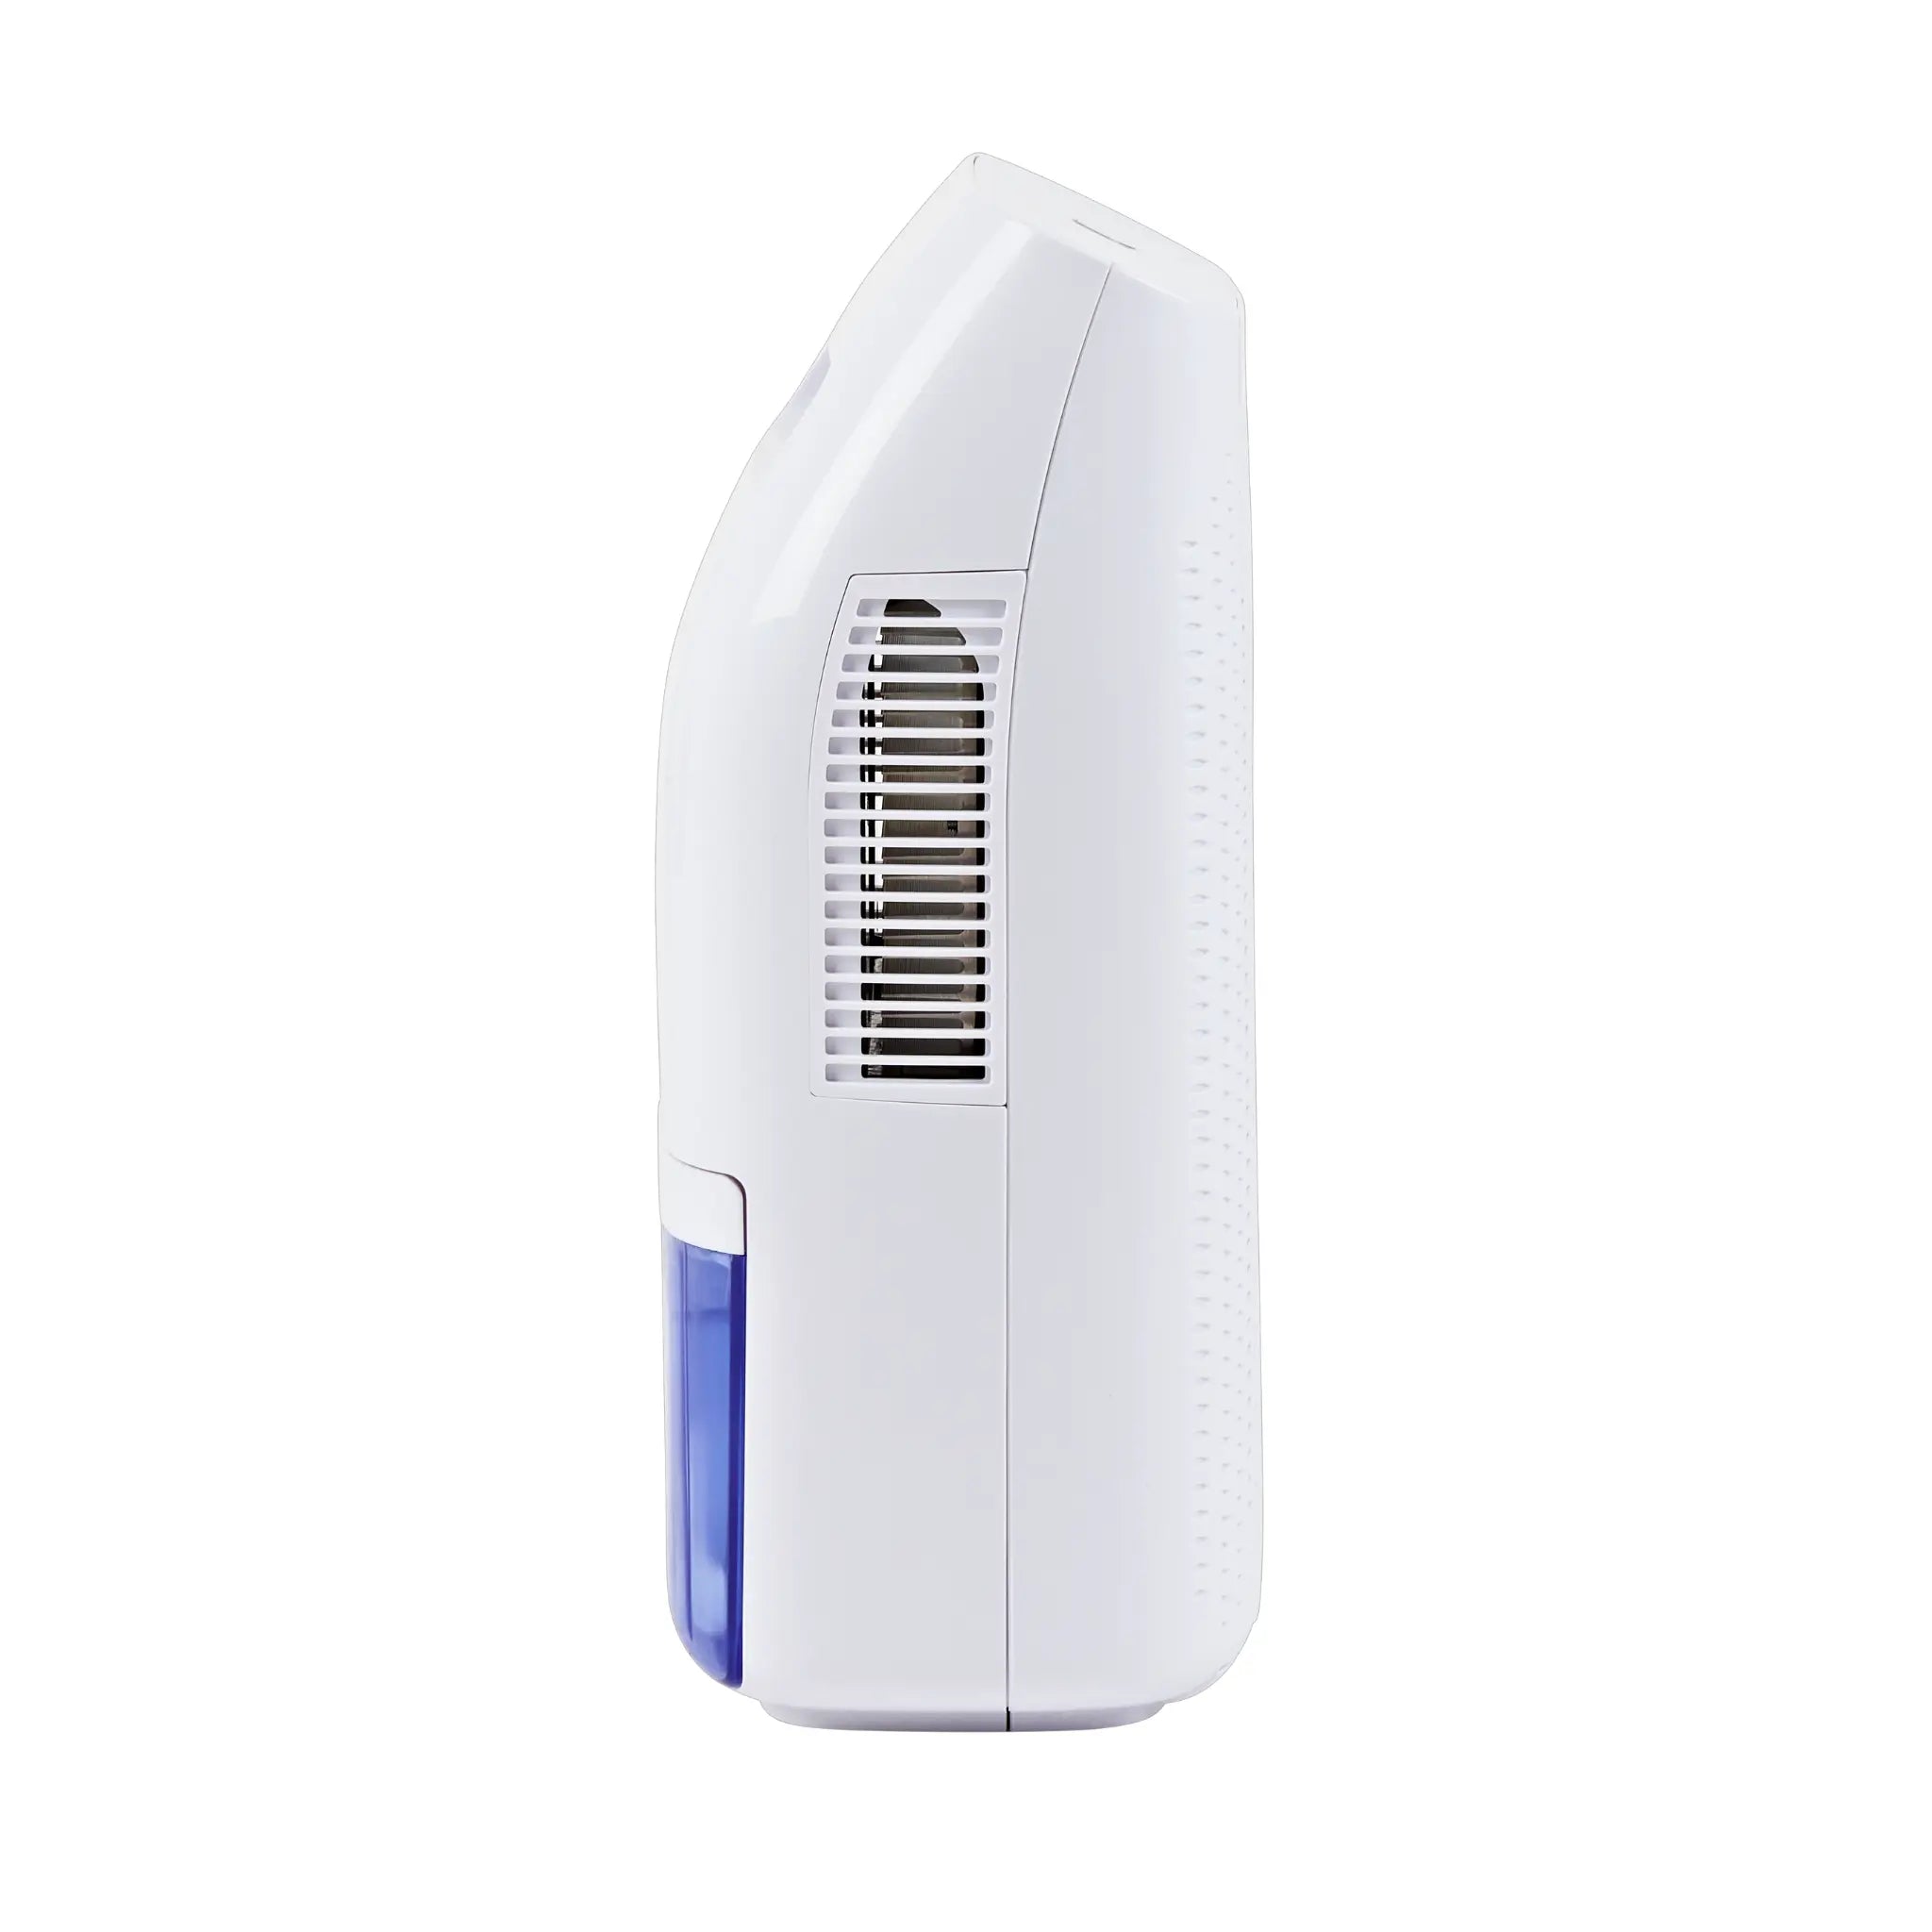 A side on image of the Senelux 750ml dehumidifier. The white design is enhanced by the purple of the dehumidifier's water tank.